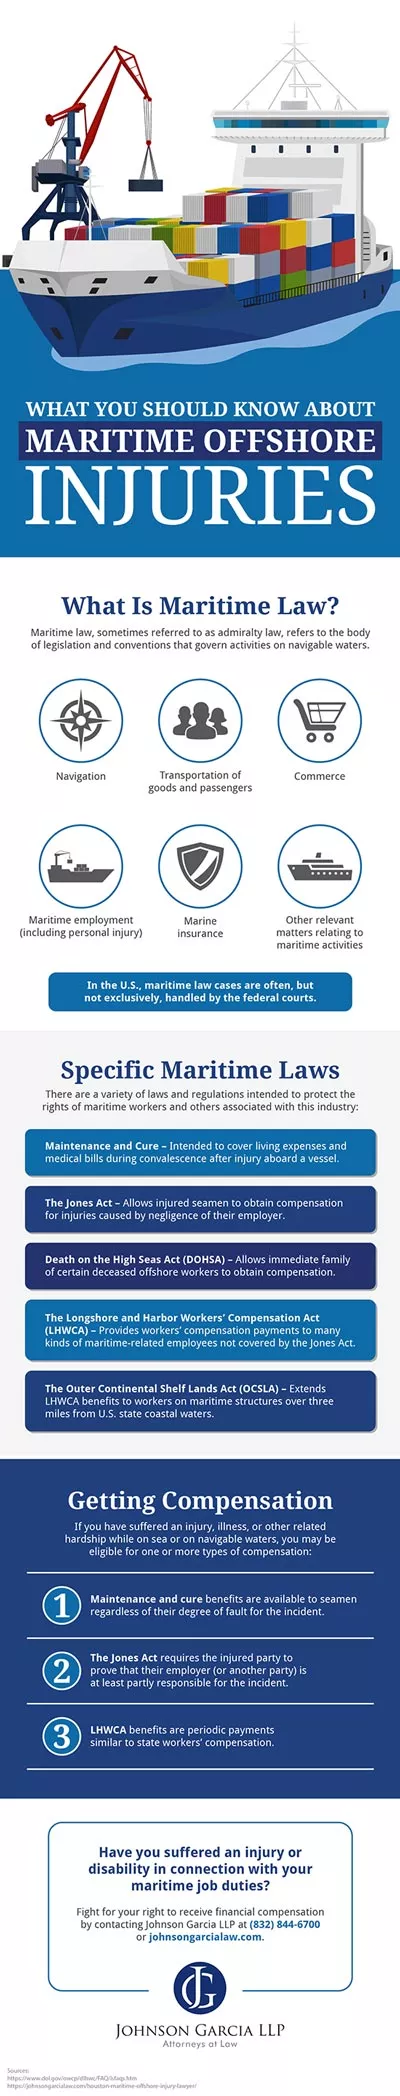 A Guide to Understanding Maritime Offshore Injuries